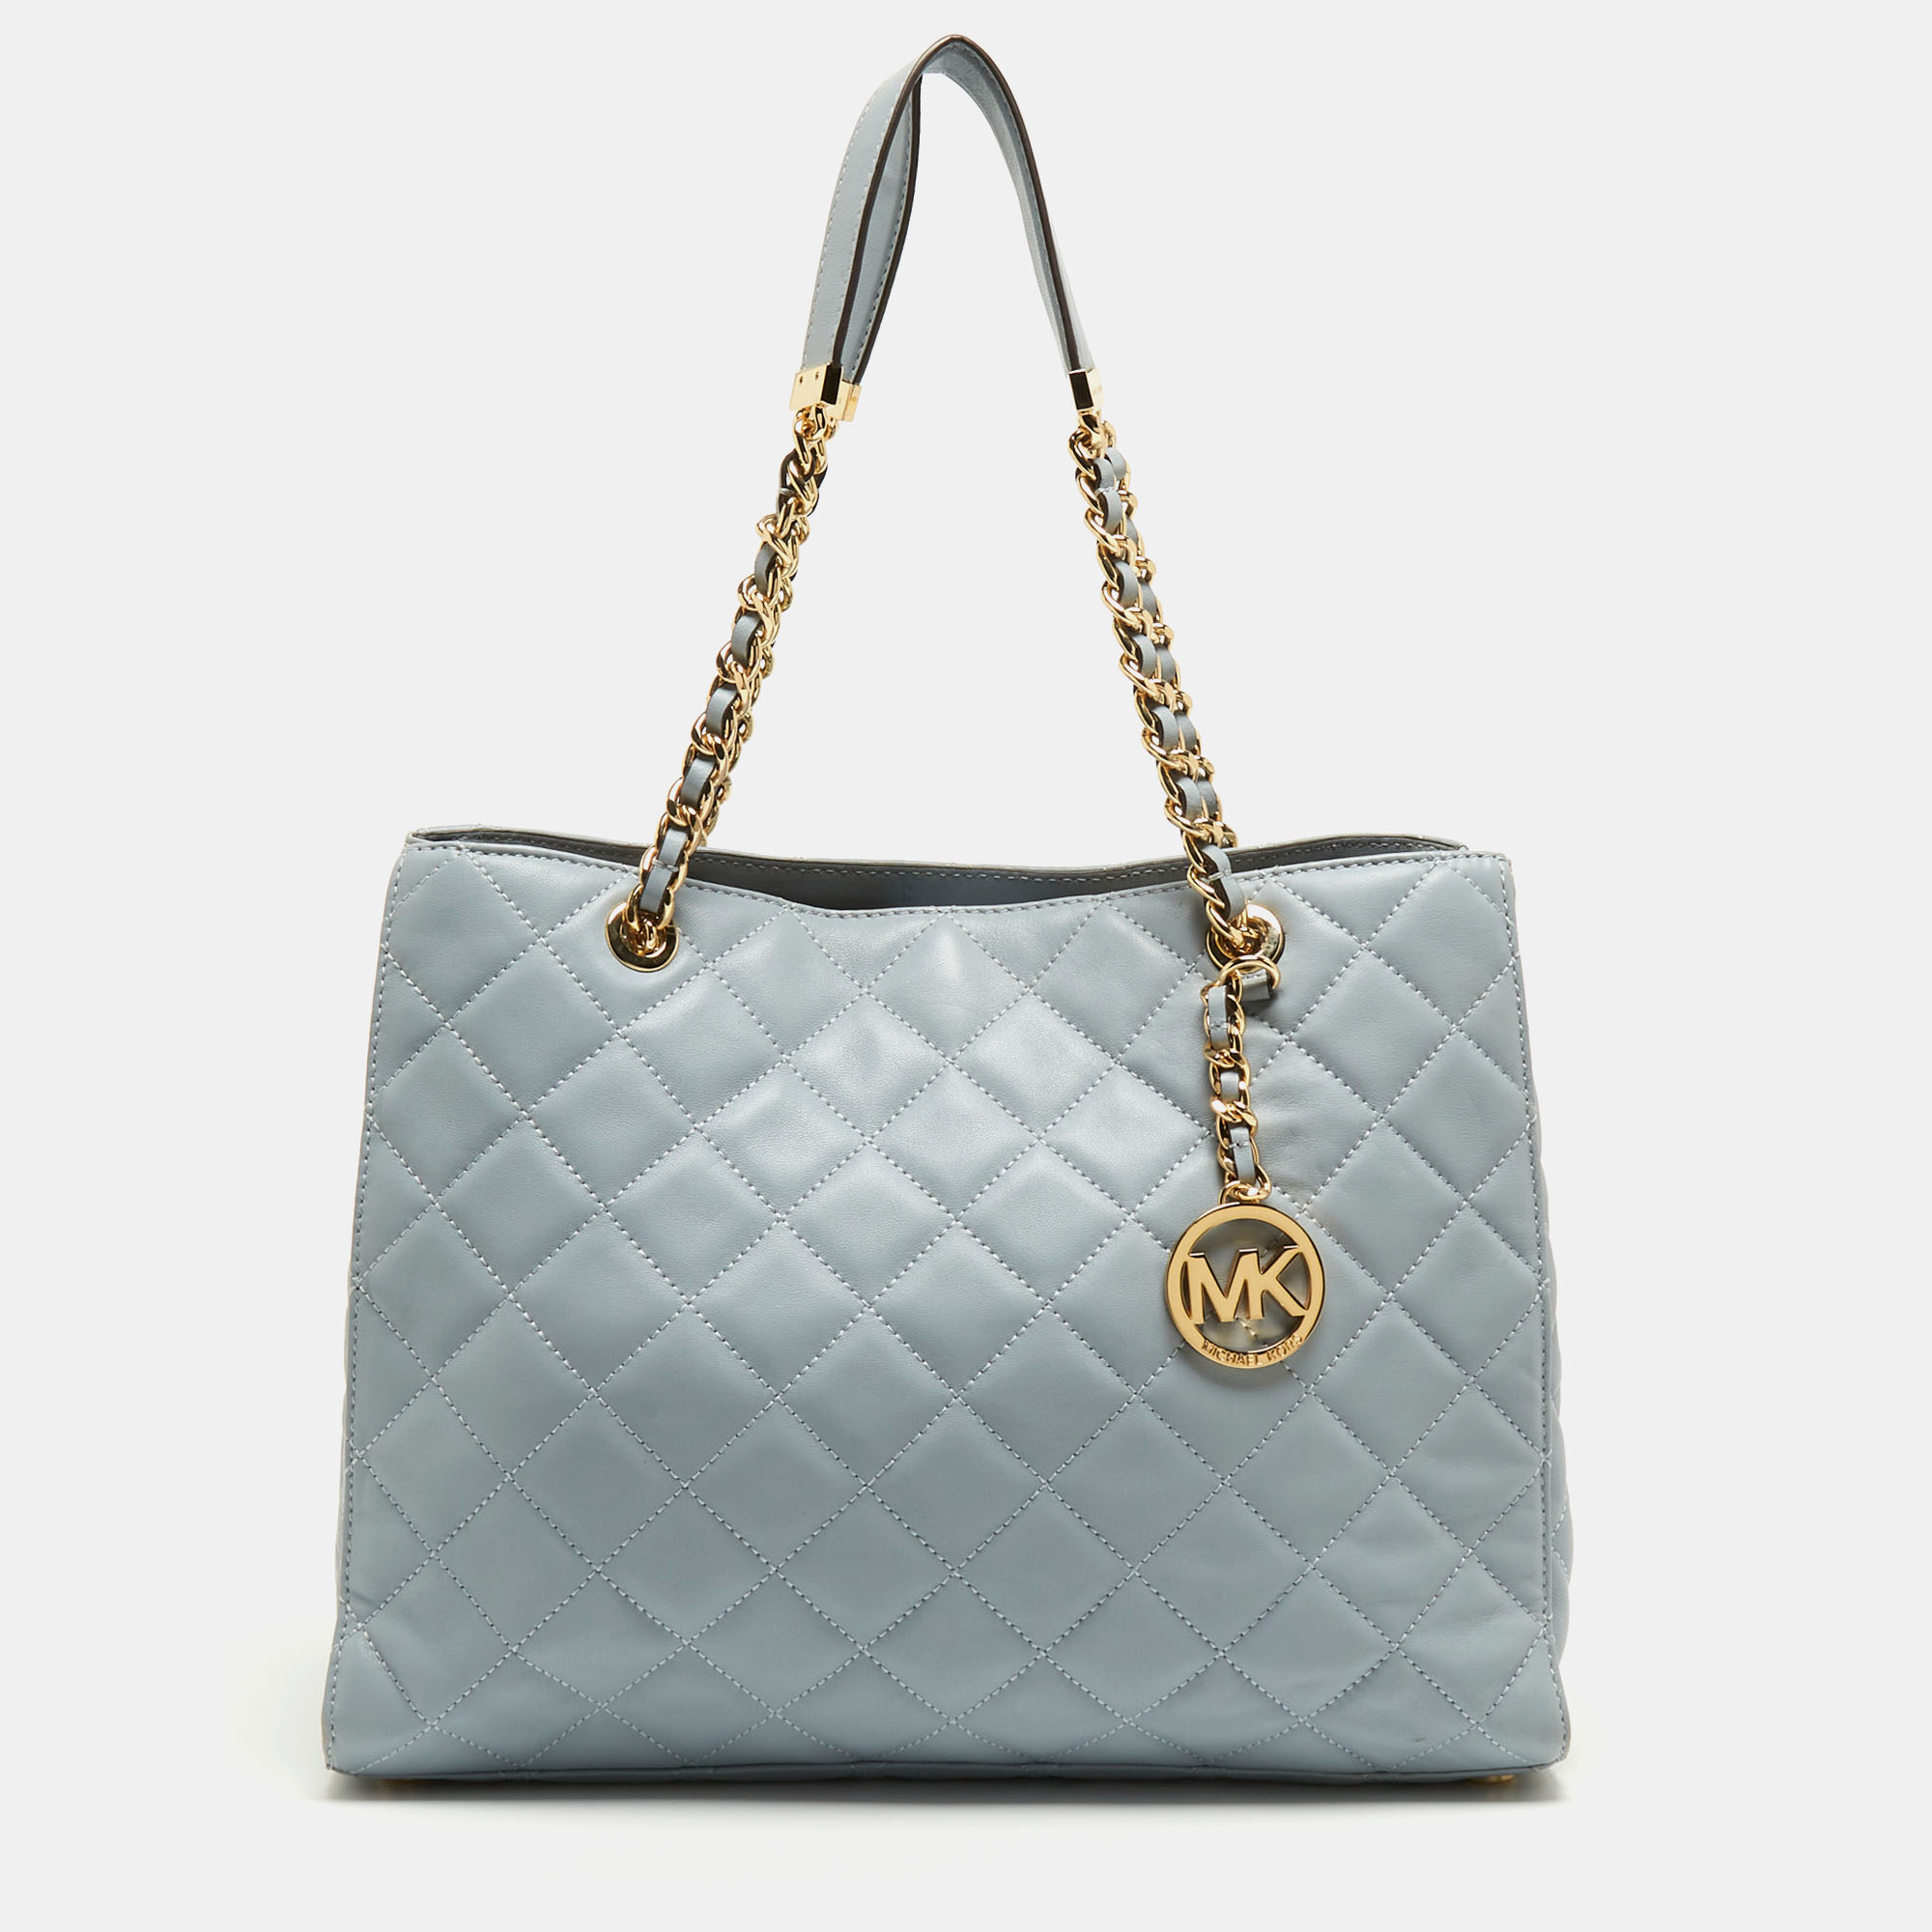 MICHAEL Michael Kors Light Blue Quilted Leather Susannah Tote